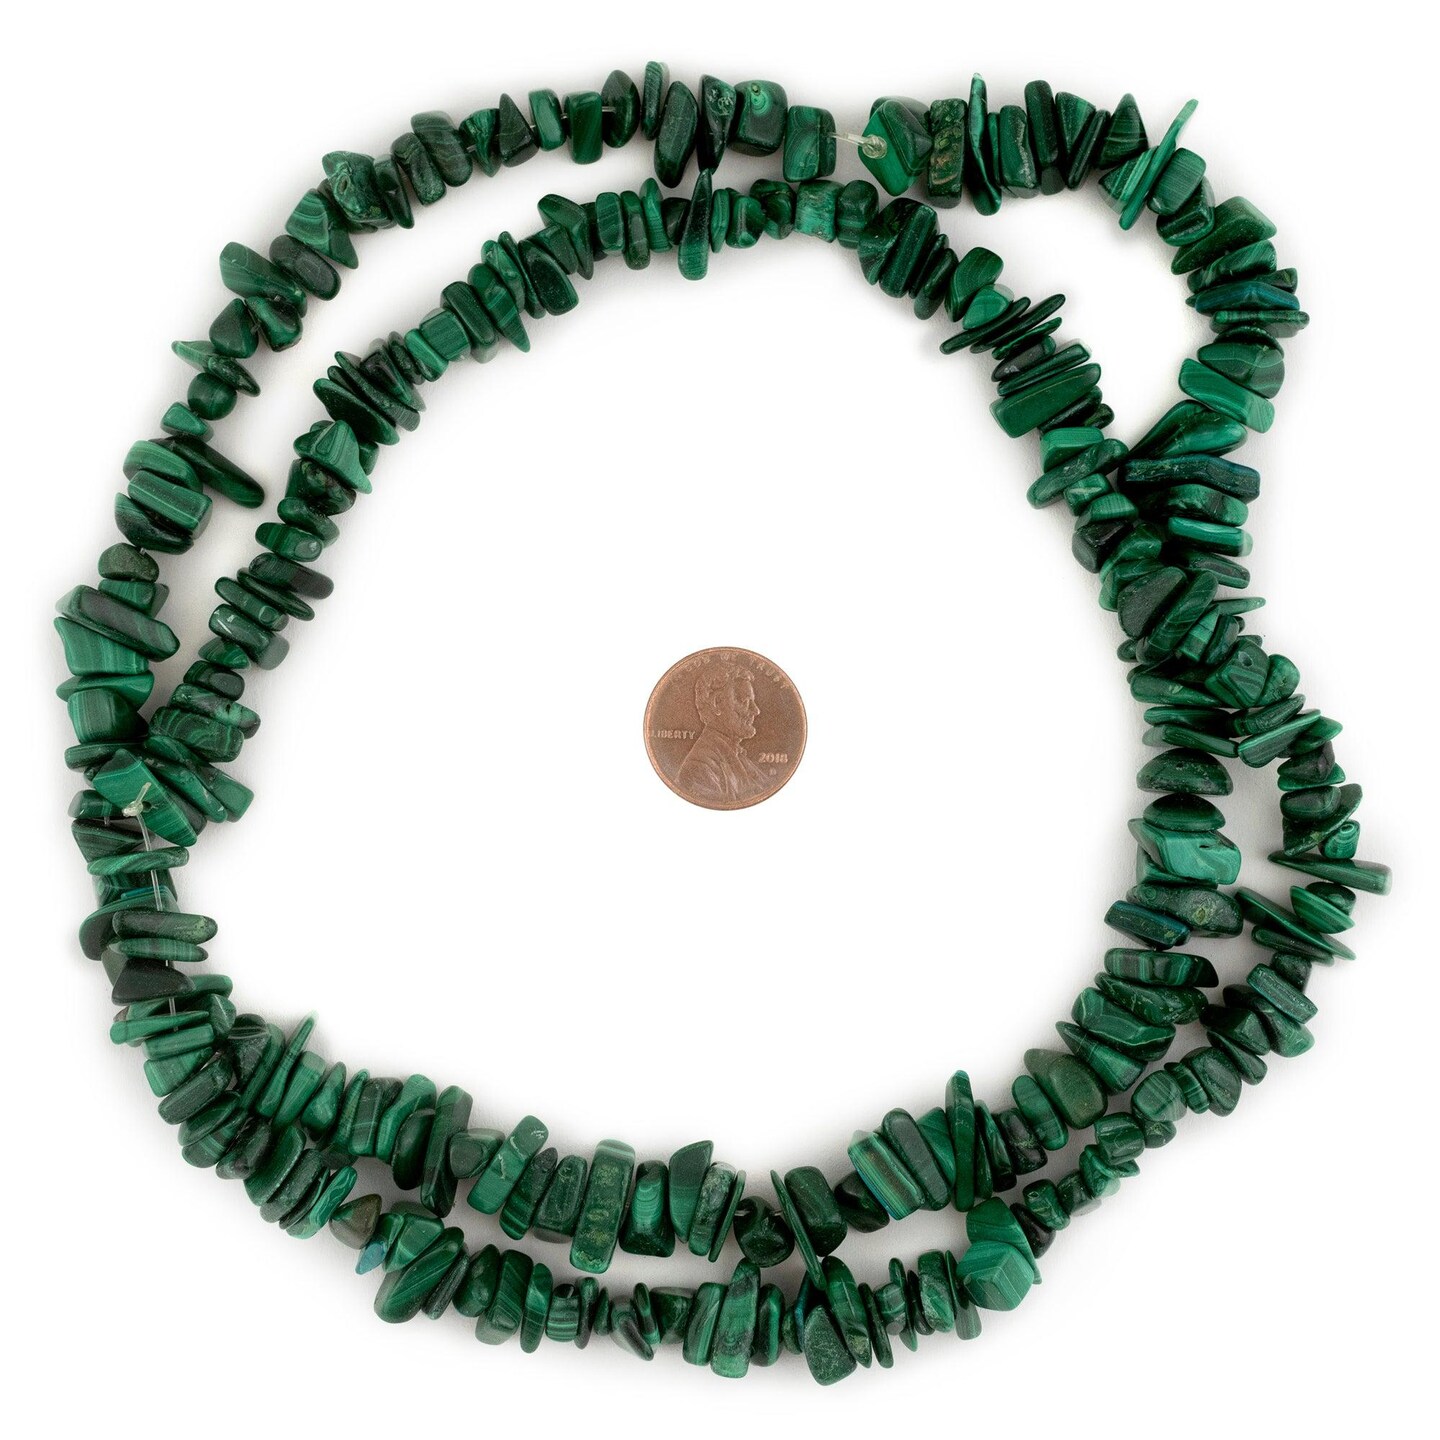 TheBeadChest Malachite Chip Beads 10mm Green Chips Gemstone 16 Inch Strand